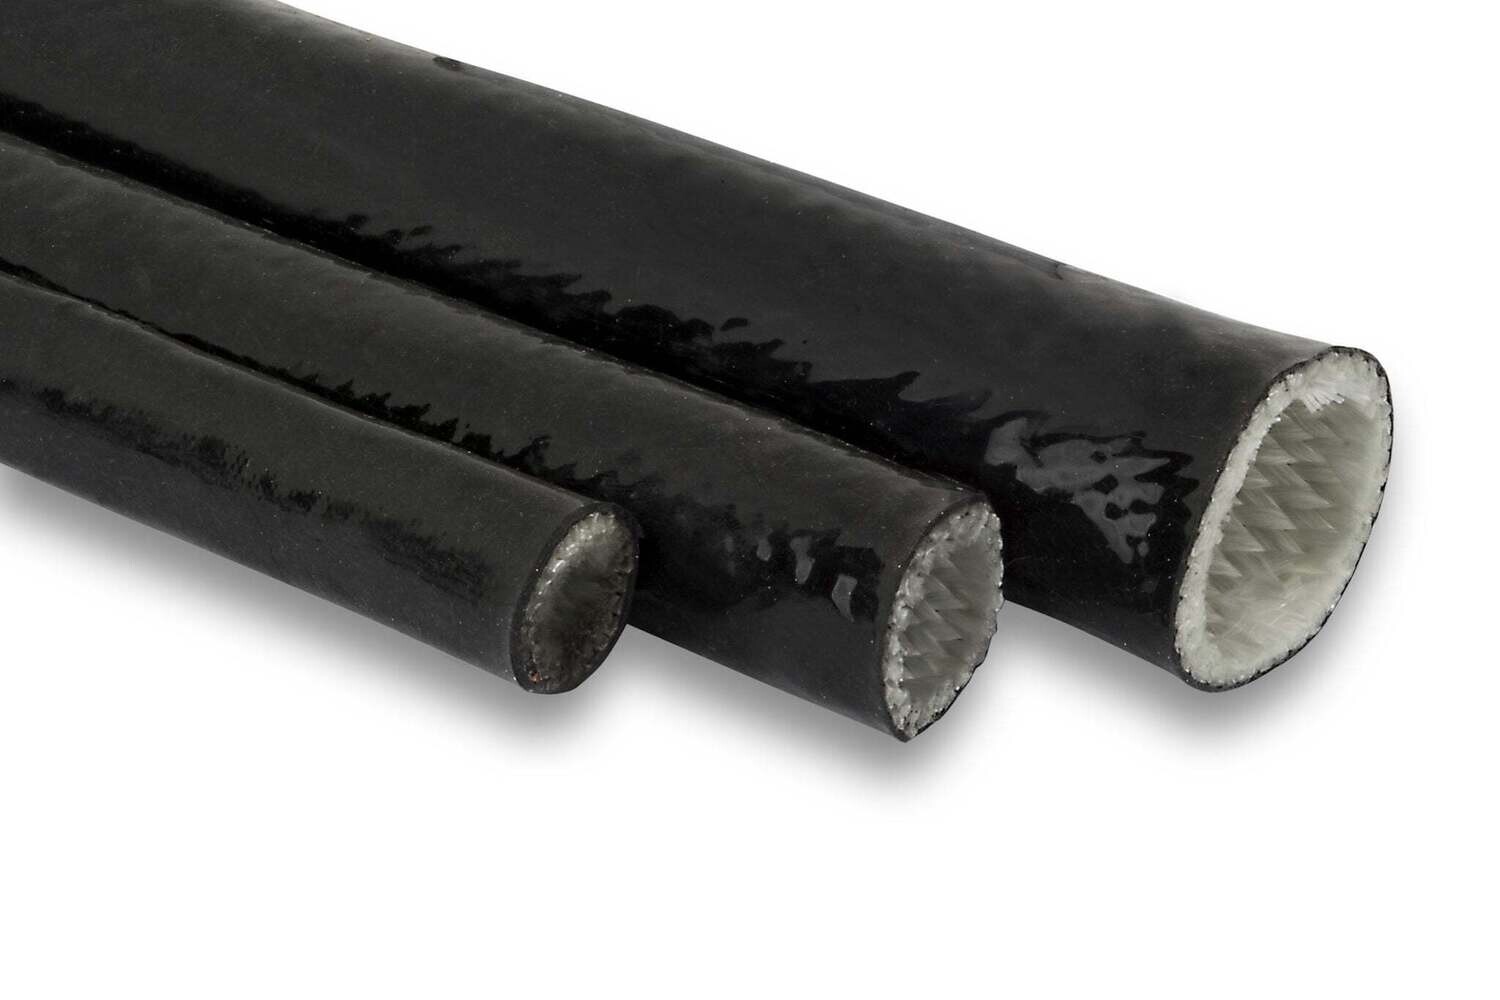 Black Silicon High Heat Sleeve - AN6 (Utilises 7mm Sleeving), 1.0m Multiple Qty will come on a continuous Roll